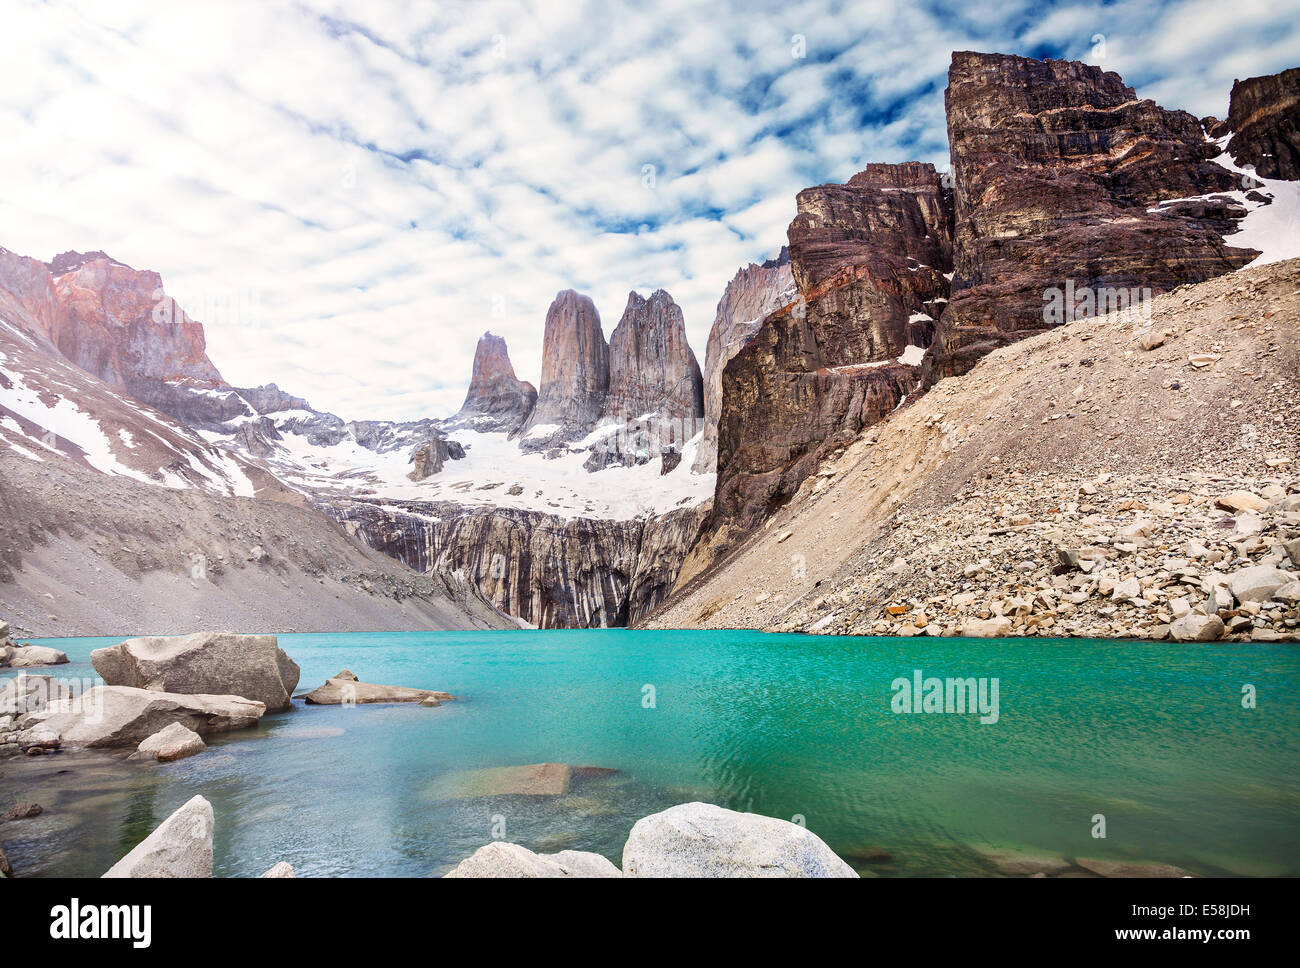 Mountains and lake in Torres del Paine National Park, Patagonia, Chile Stock Photo